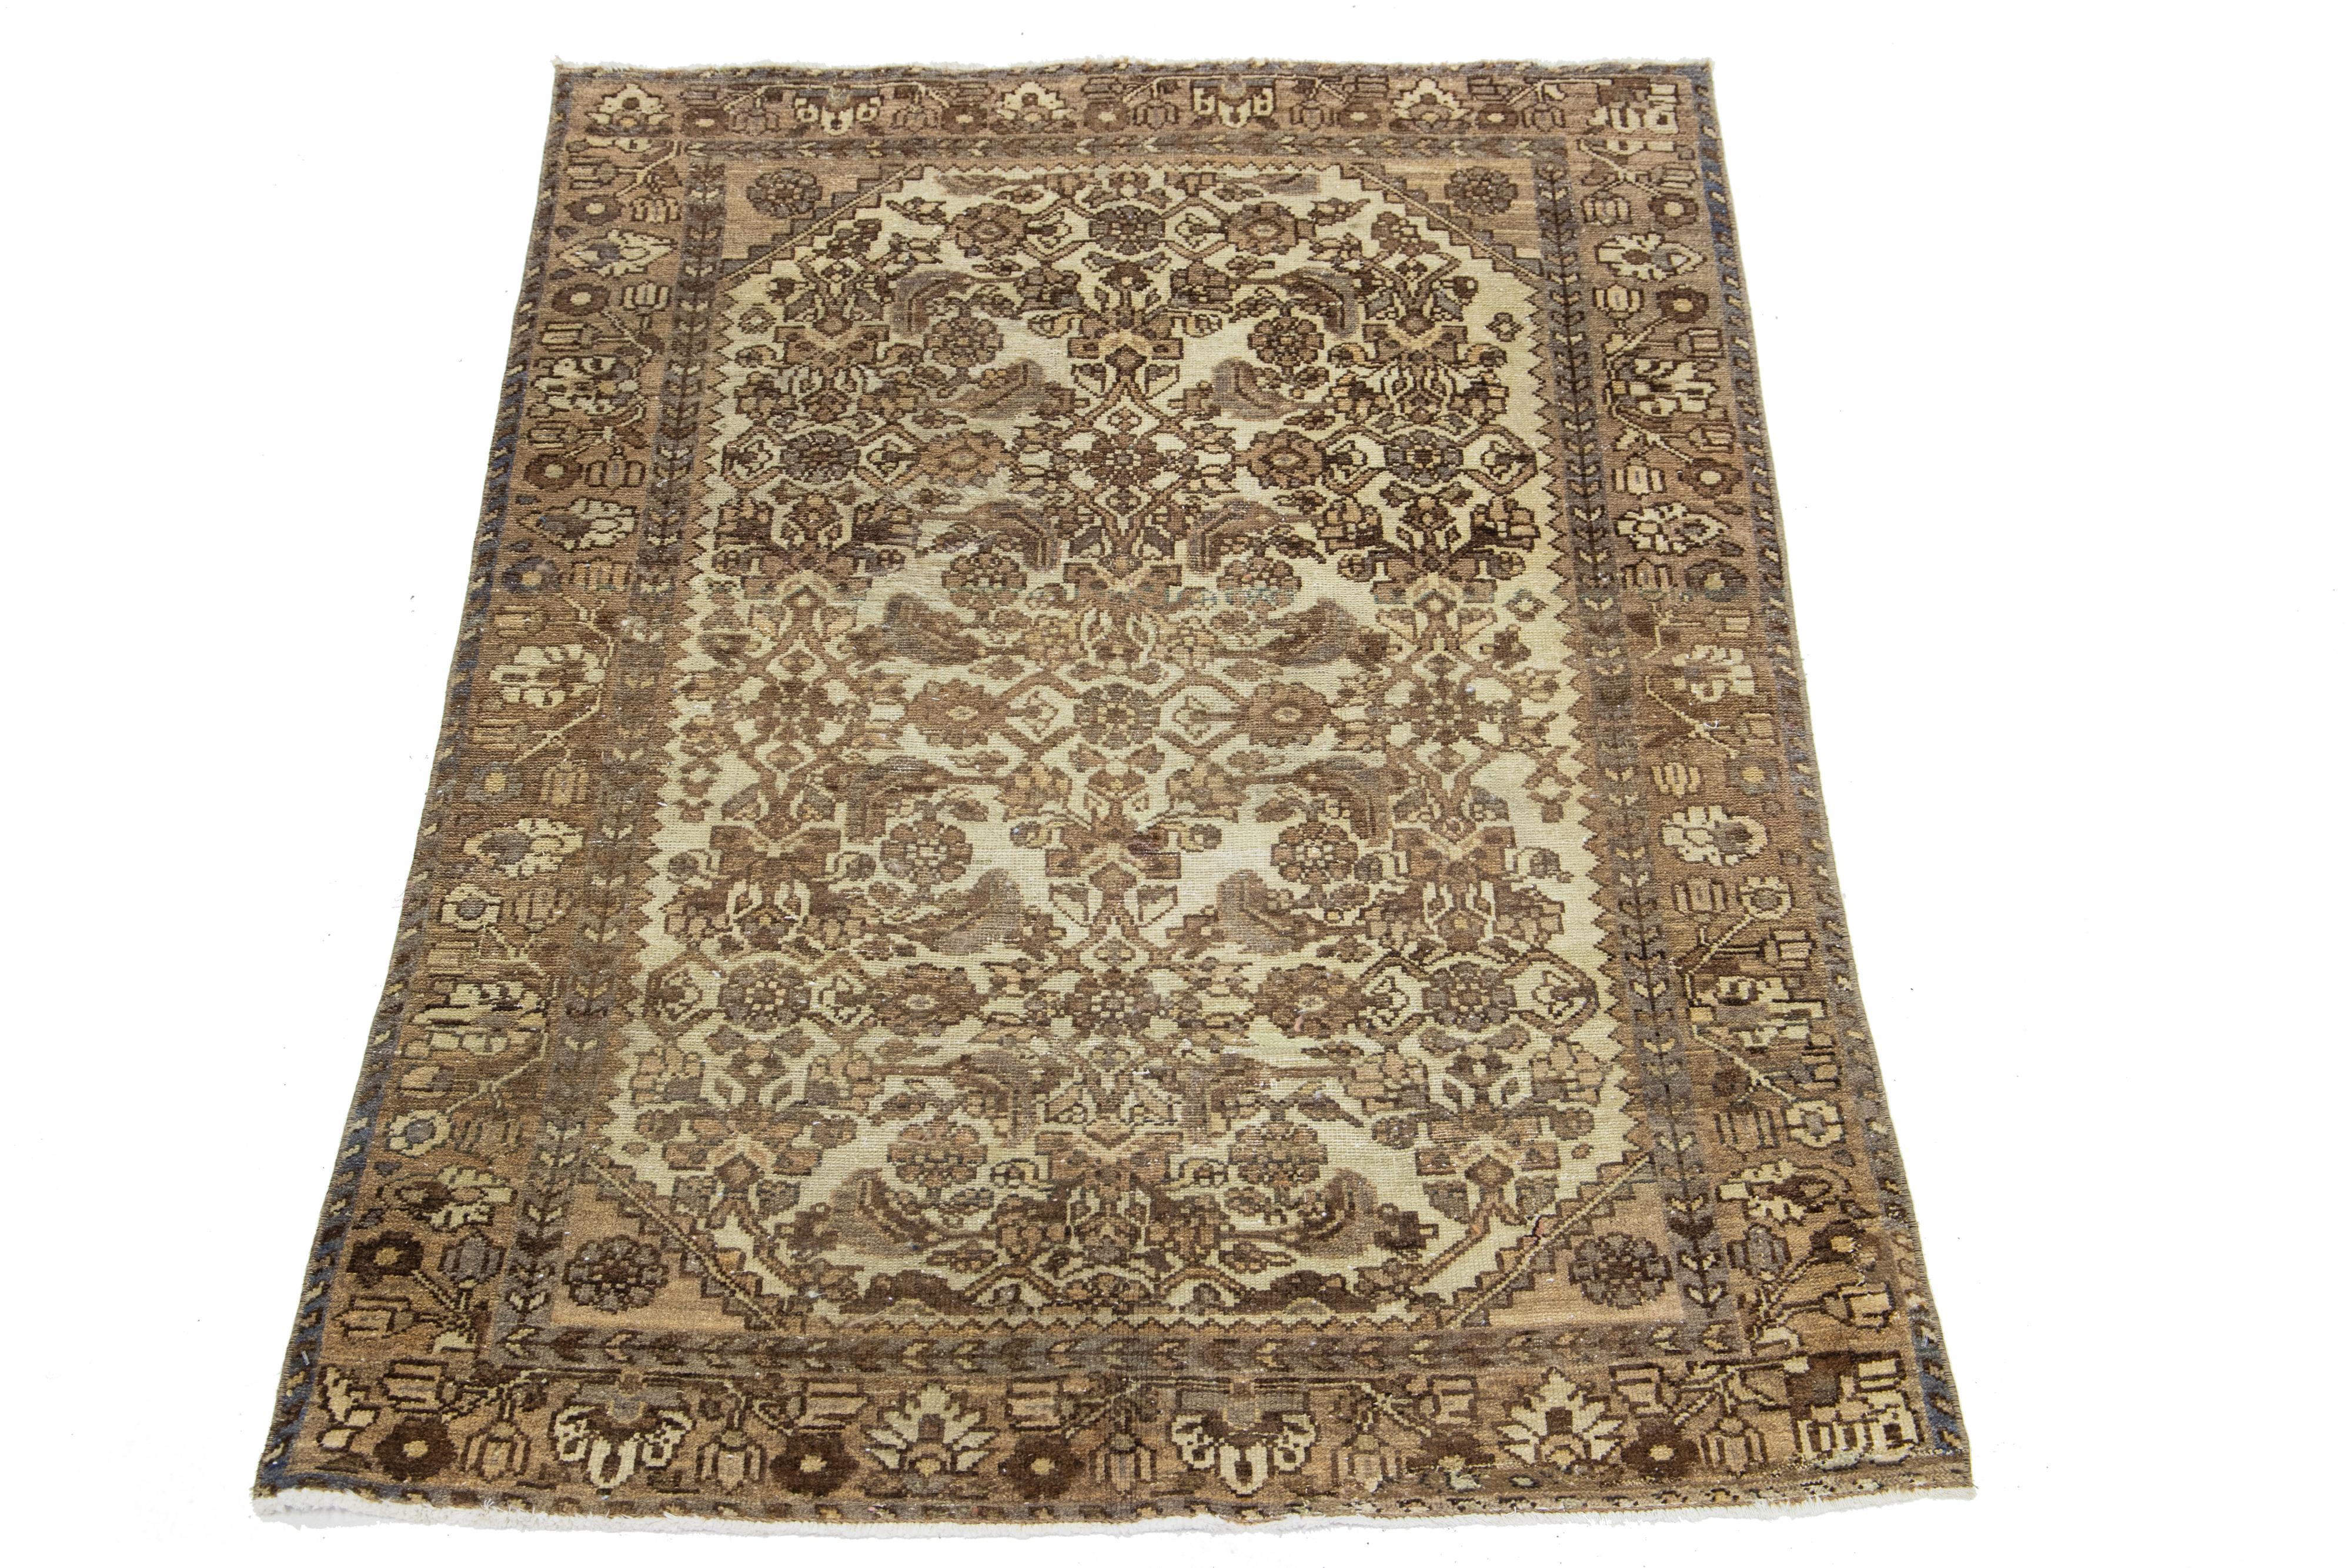 This stunning antique Persian Malayer rug is fashioned from meticulously hand-knotted wool, featuring a serene beige field adorned with brown and gray accents in an exquisite all-over classic design.

This rug measures 3'4